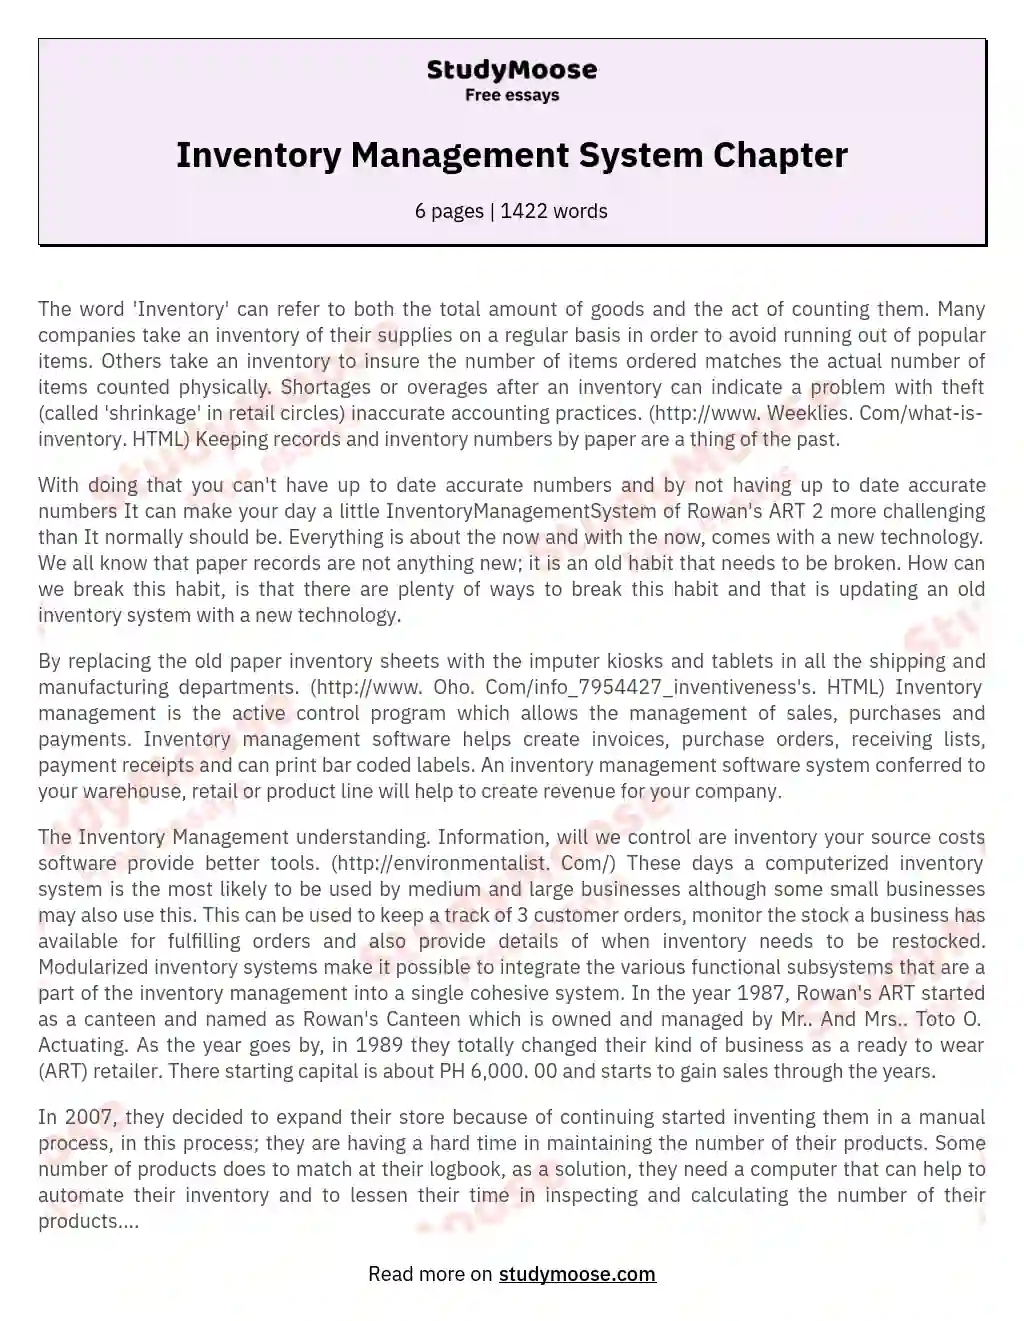 Inventory Management System Chapter essay